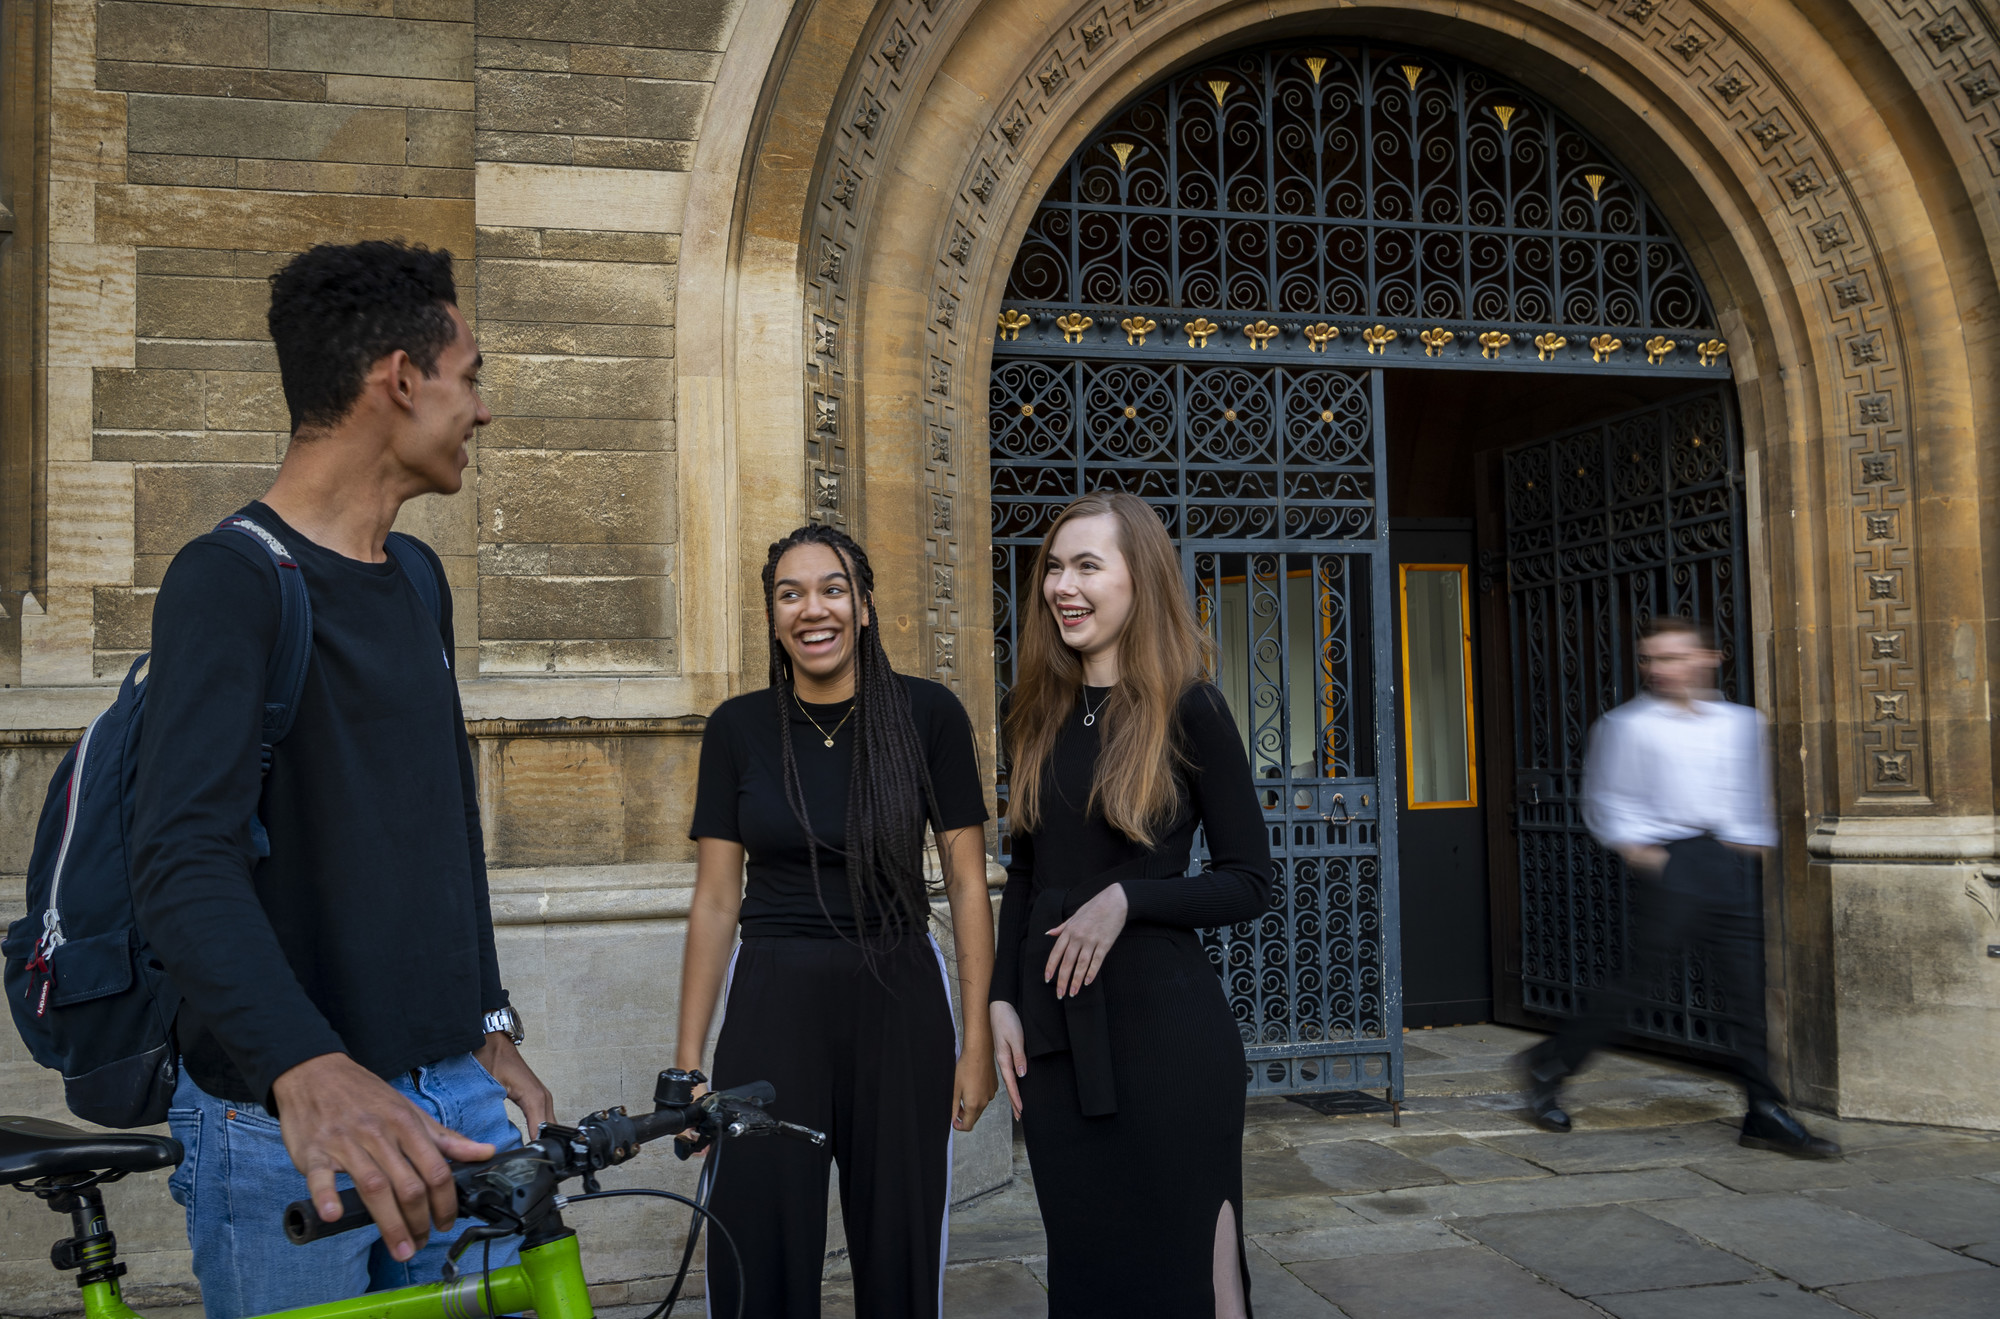 Students talking outside the Great Gate